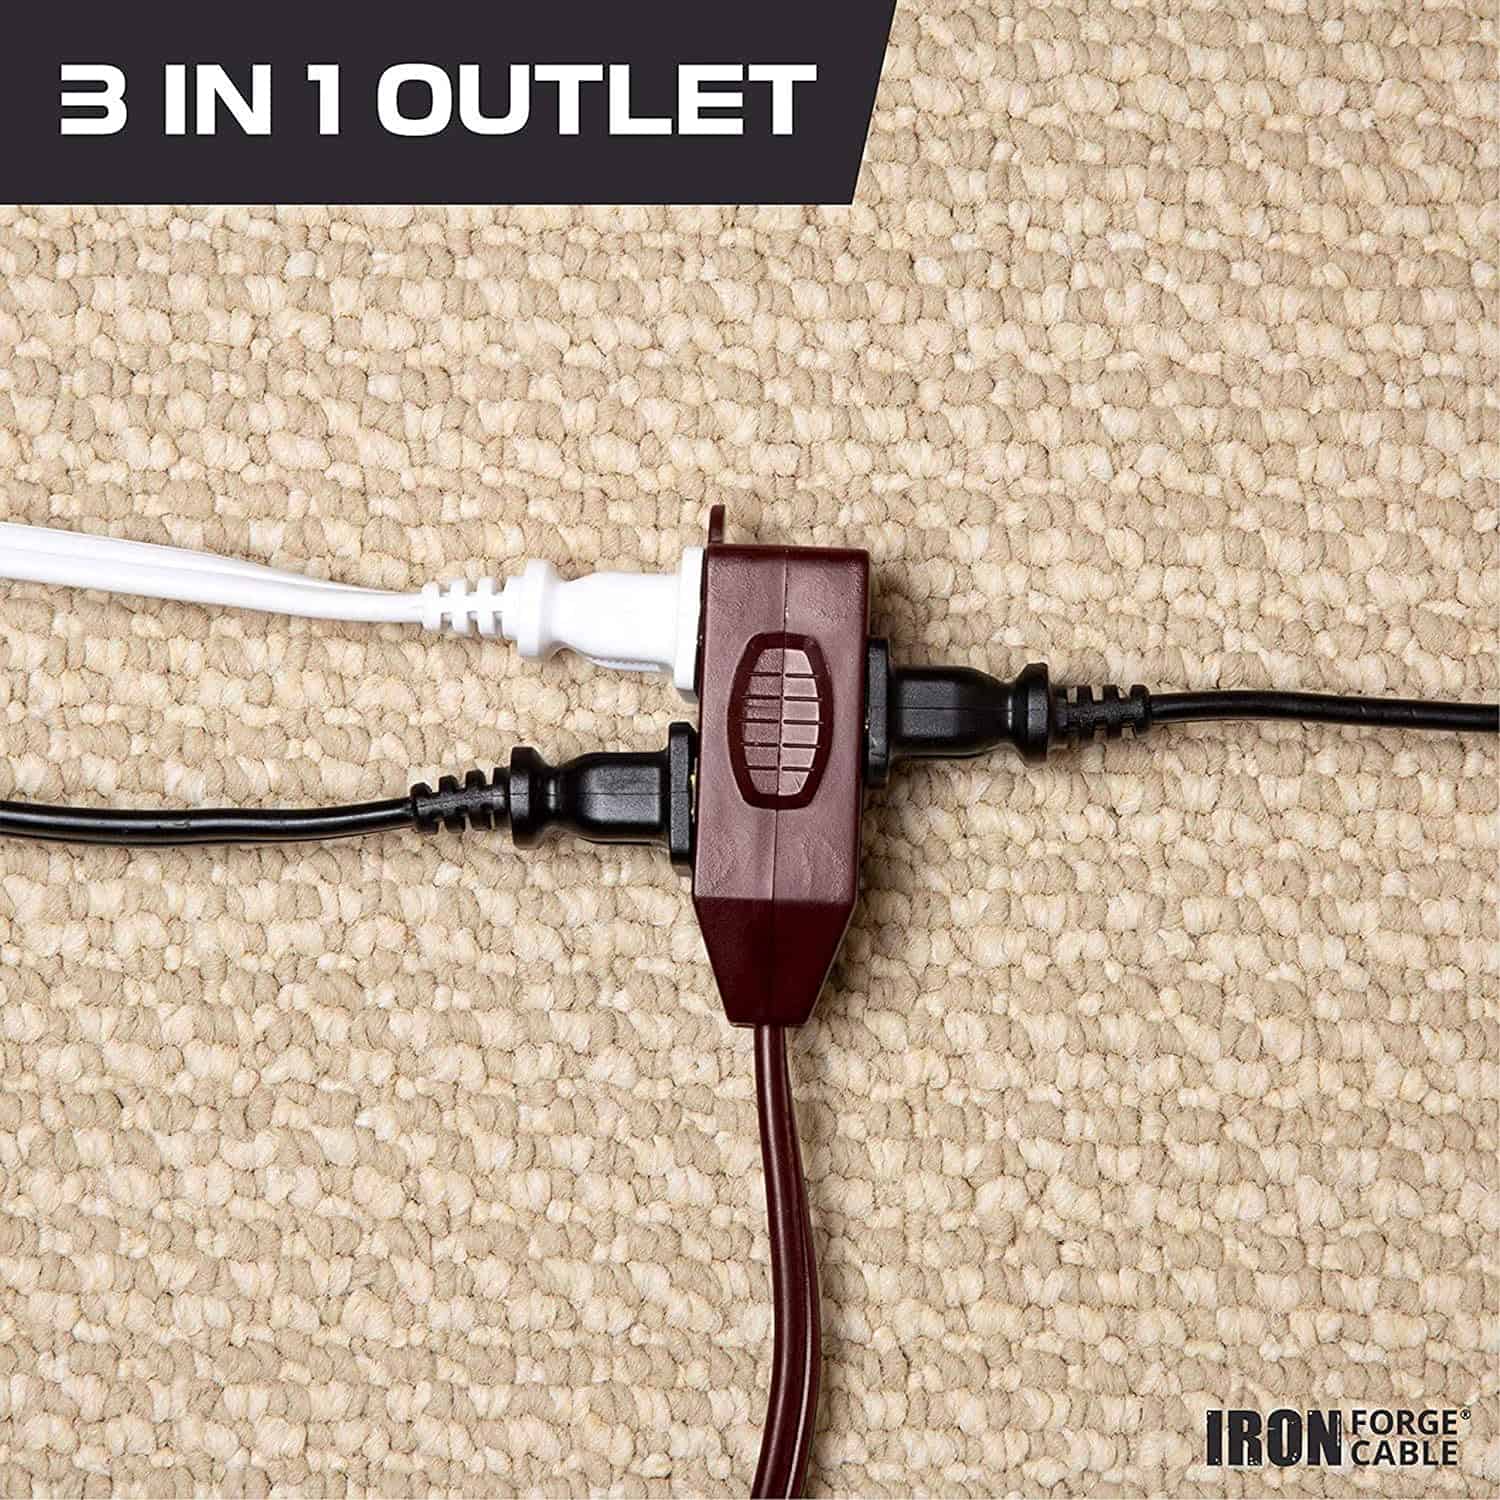 Iron Forge Cable Brown Extension Cord with 3 Outlets 3 Pack, 10ft 15ft & 20ft, 16 2 Indoor Extension Cord with Multiple Outlets 13 AMP 2 Prong Electrical Cable for Home Office Household Appliances 4